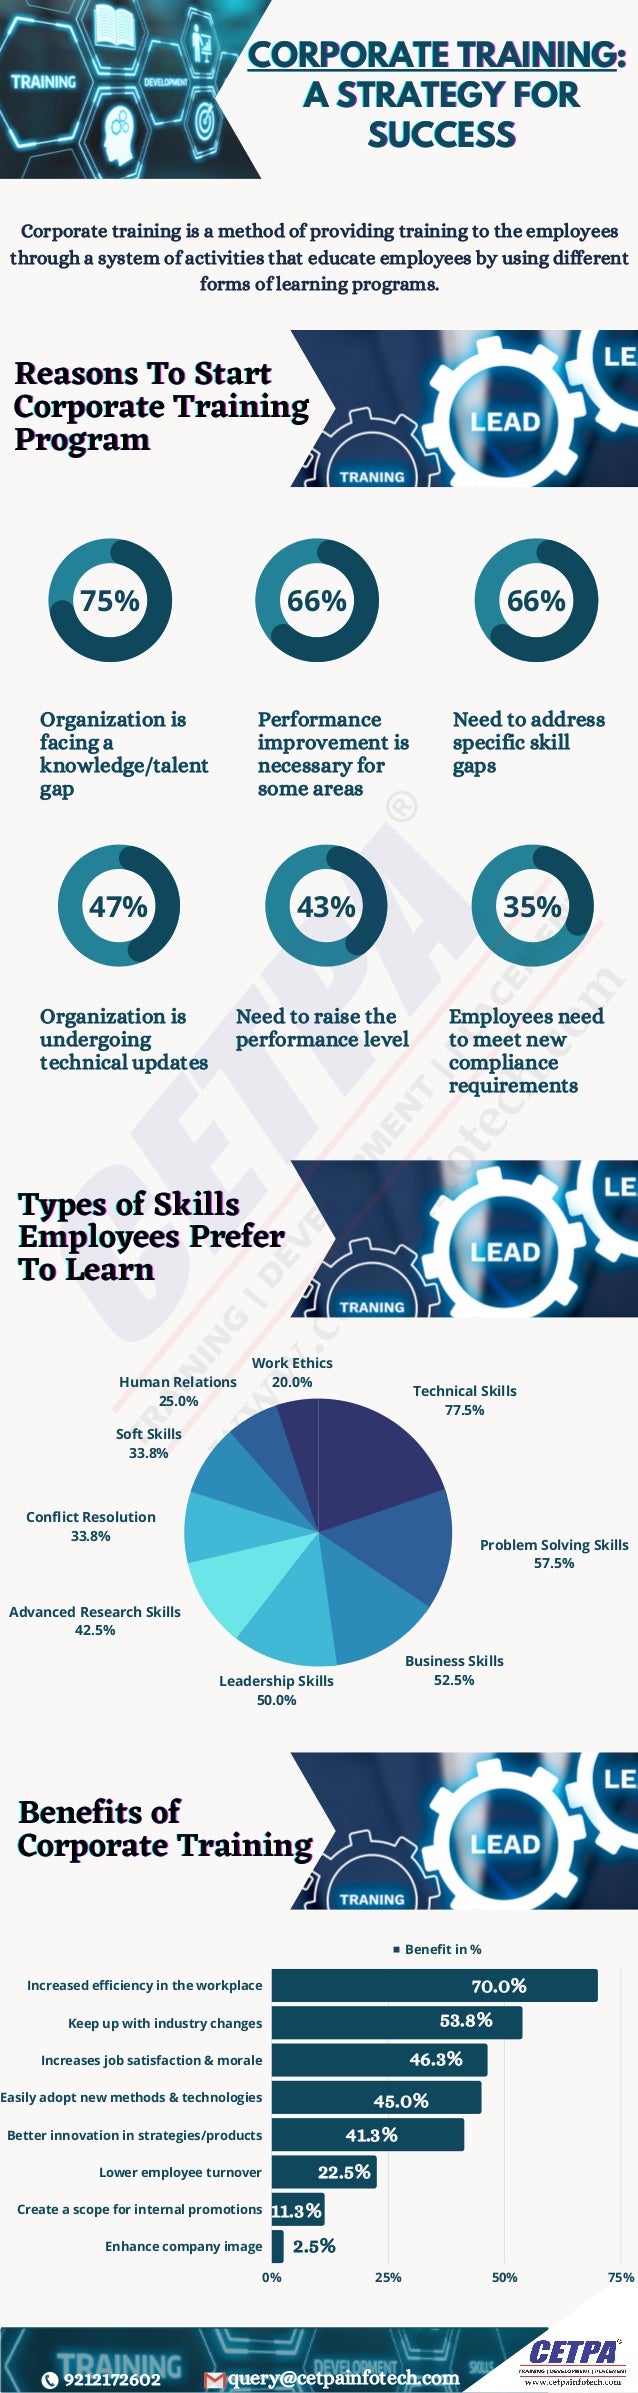 75% 66% 66%
47% 43% 35%
Technical Skills
77.5%
Problem Solving Skills
57.5%
Business Skills
52.5%
Leadership Skills
50.0%
Advanced Research Skills
42.5%
Conflict Resolution
33.8%
Soft Skills
33.8%
Human Relations
25.0%
Work Ethics
20.0%
Benefit in %
0% 25% 50% 75%
Increased efficiency in the workplace
Keep up with industry changes
Increases job satisfaction & morale
Easily adopt new methods & technologies
Better innovation in strategies/products
Lower employee turnover
Create a scope for internal promotions
Enhance company image
CORPORATE TRAINING
CORPORATE TRAINING
CORPORATE TRAINING:
:
:
A STRATEGY FOR
A STRATEGY FOR
A STRATEGY FOR
SUCCESS
SUCCESS
SUCCESS
Corporate training is a method of providing training to the employees
through a system of activities that educate employees by using different
forms of learning programs.
Reasons To Start
Reasons To Start
Reasons To Start
Corporate Training
Corporate Training
Corporate Training
Program
Program
Program
Organization is
facing a
knowledge/talent
gap
Performance
improvement is
necessary for
some areas
Need to address
specific skill
gaps
Need to raise the
performance level
Employees need
to meet new
compliance
requirements
Organization is
undergoing
technical updates
Types of Skills
Types of Skills
Types of Skills
Employees Prefer
Employees Prefer
Employees Prefer
To Learn
To Learn
To Learn
Benefits of
Benefits of
Benefits of
Corporate Training
Corporate Training
Corporate Training
9212172602 query@cetpainfotech.com
70.0%
53.8%
46.3%
45.0%
41.3%
22.5%
11.3%
2.5%
 